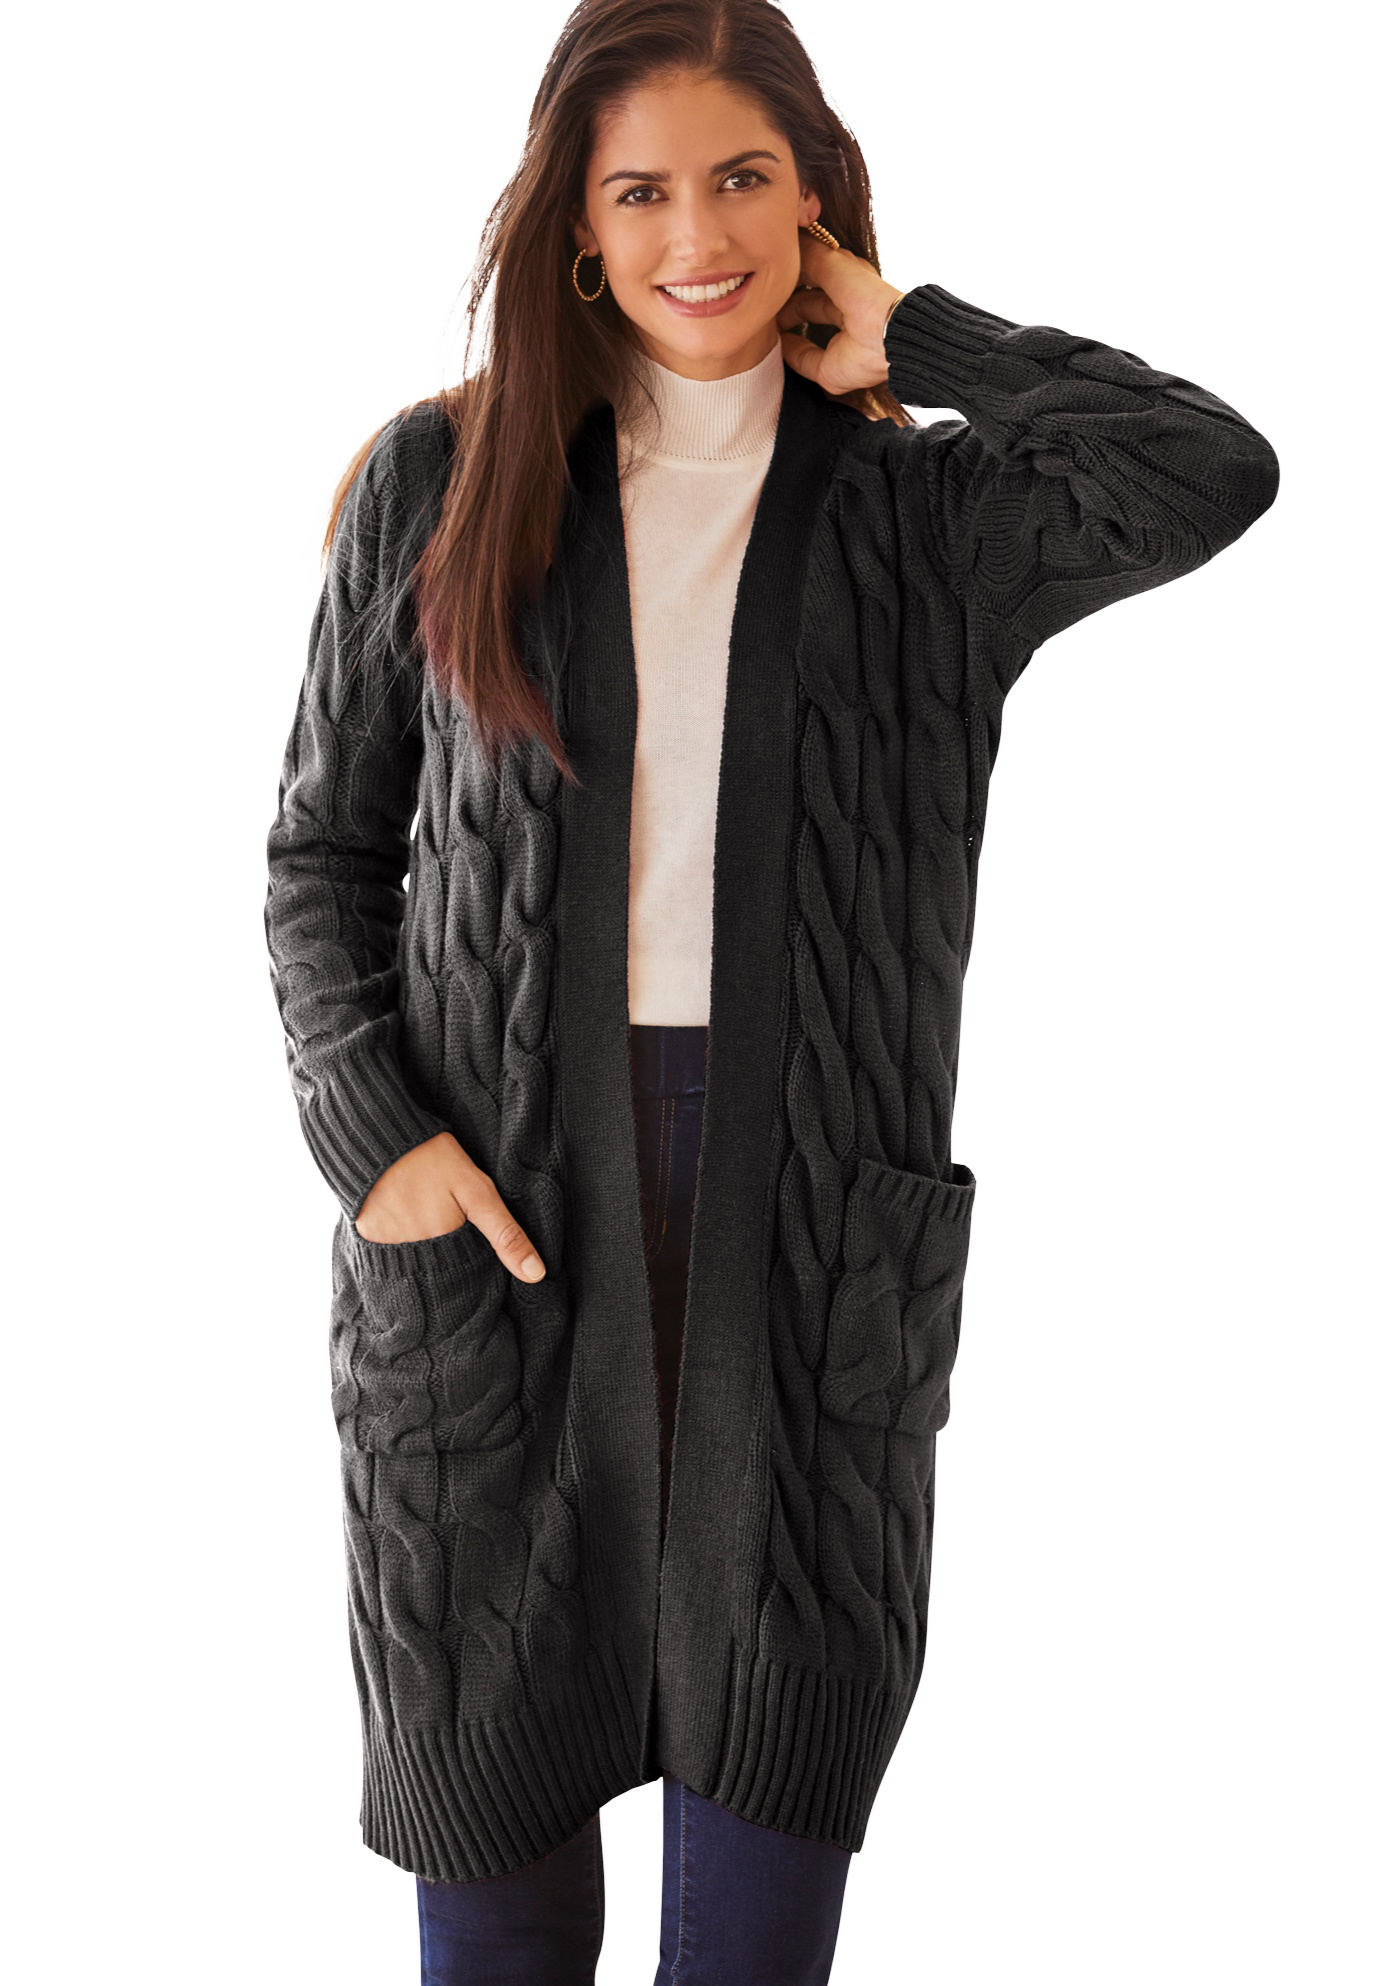 Jessica London Women's Plus Size Cable Duster Sweater Long Cardigan - image 1 of 5